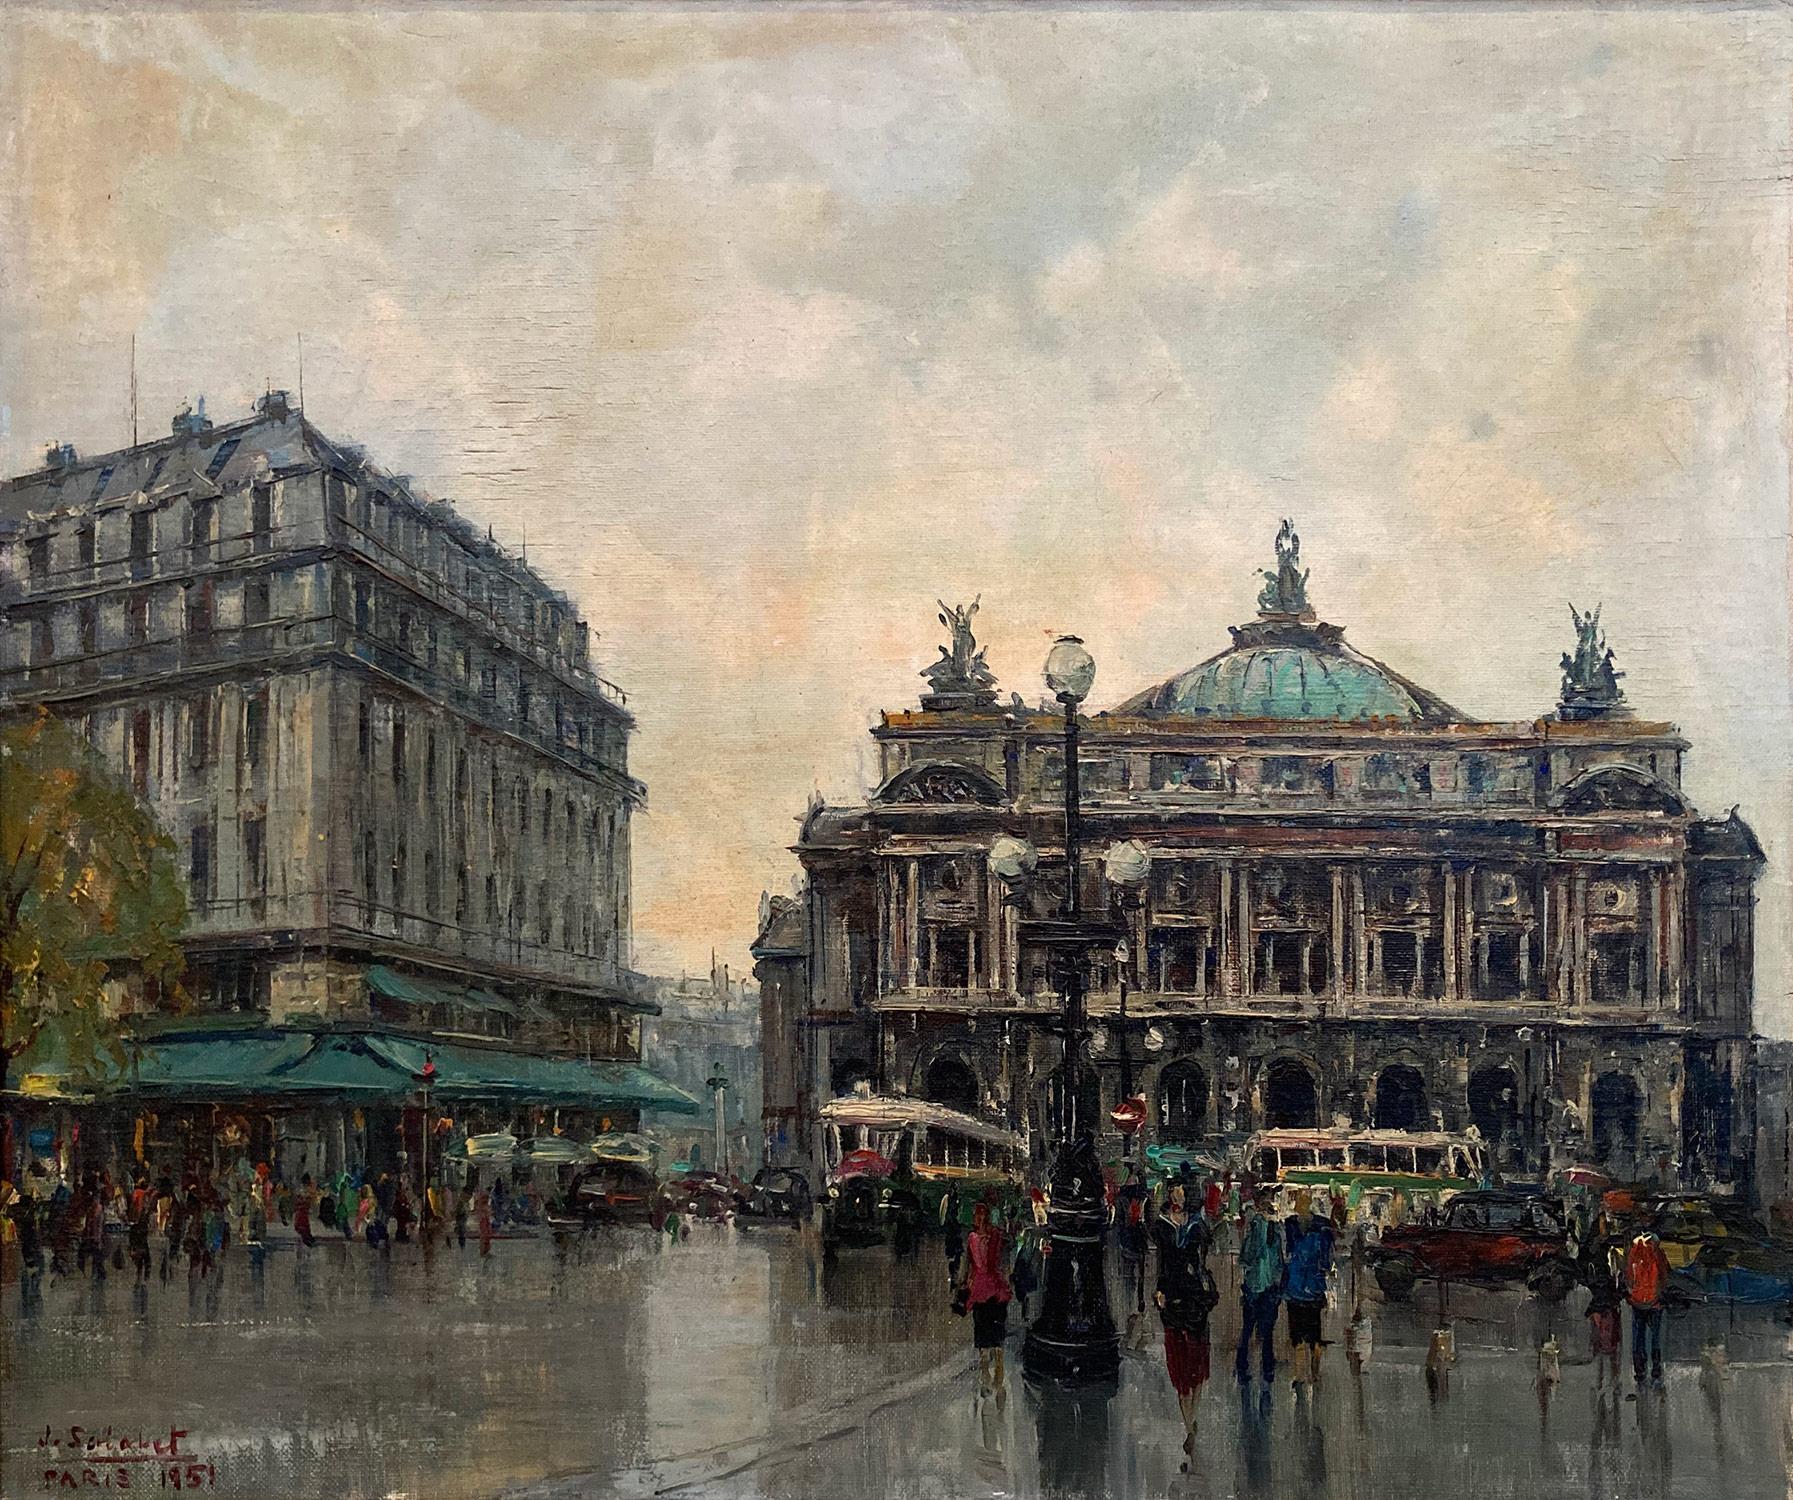 A beautiful oil on canvas painting by the French artist, Jean Salabet. Salabet was a Parisian painter known for his colorful cityscapes depicting the times of his generation. His work is comparable to those of Jules Herve, Antoine Blanchard, and